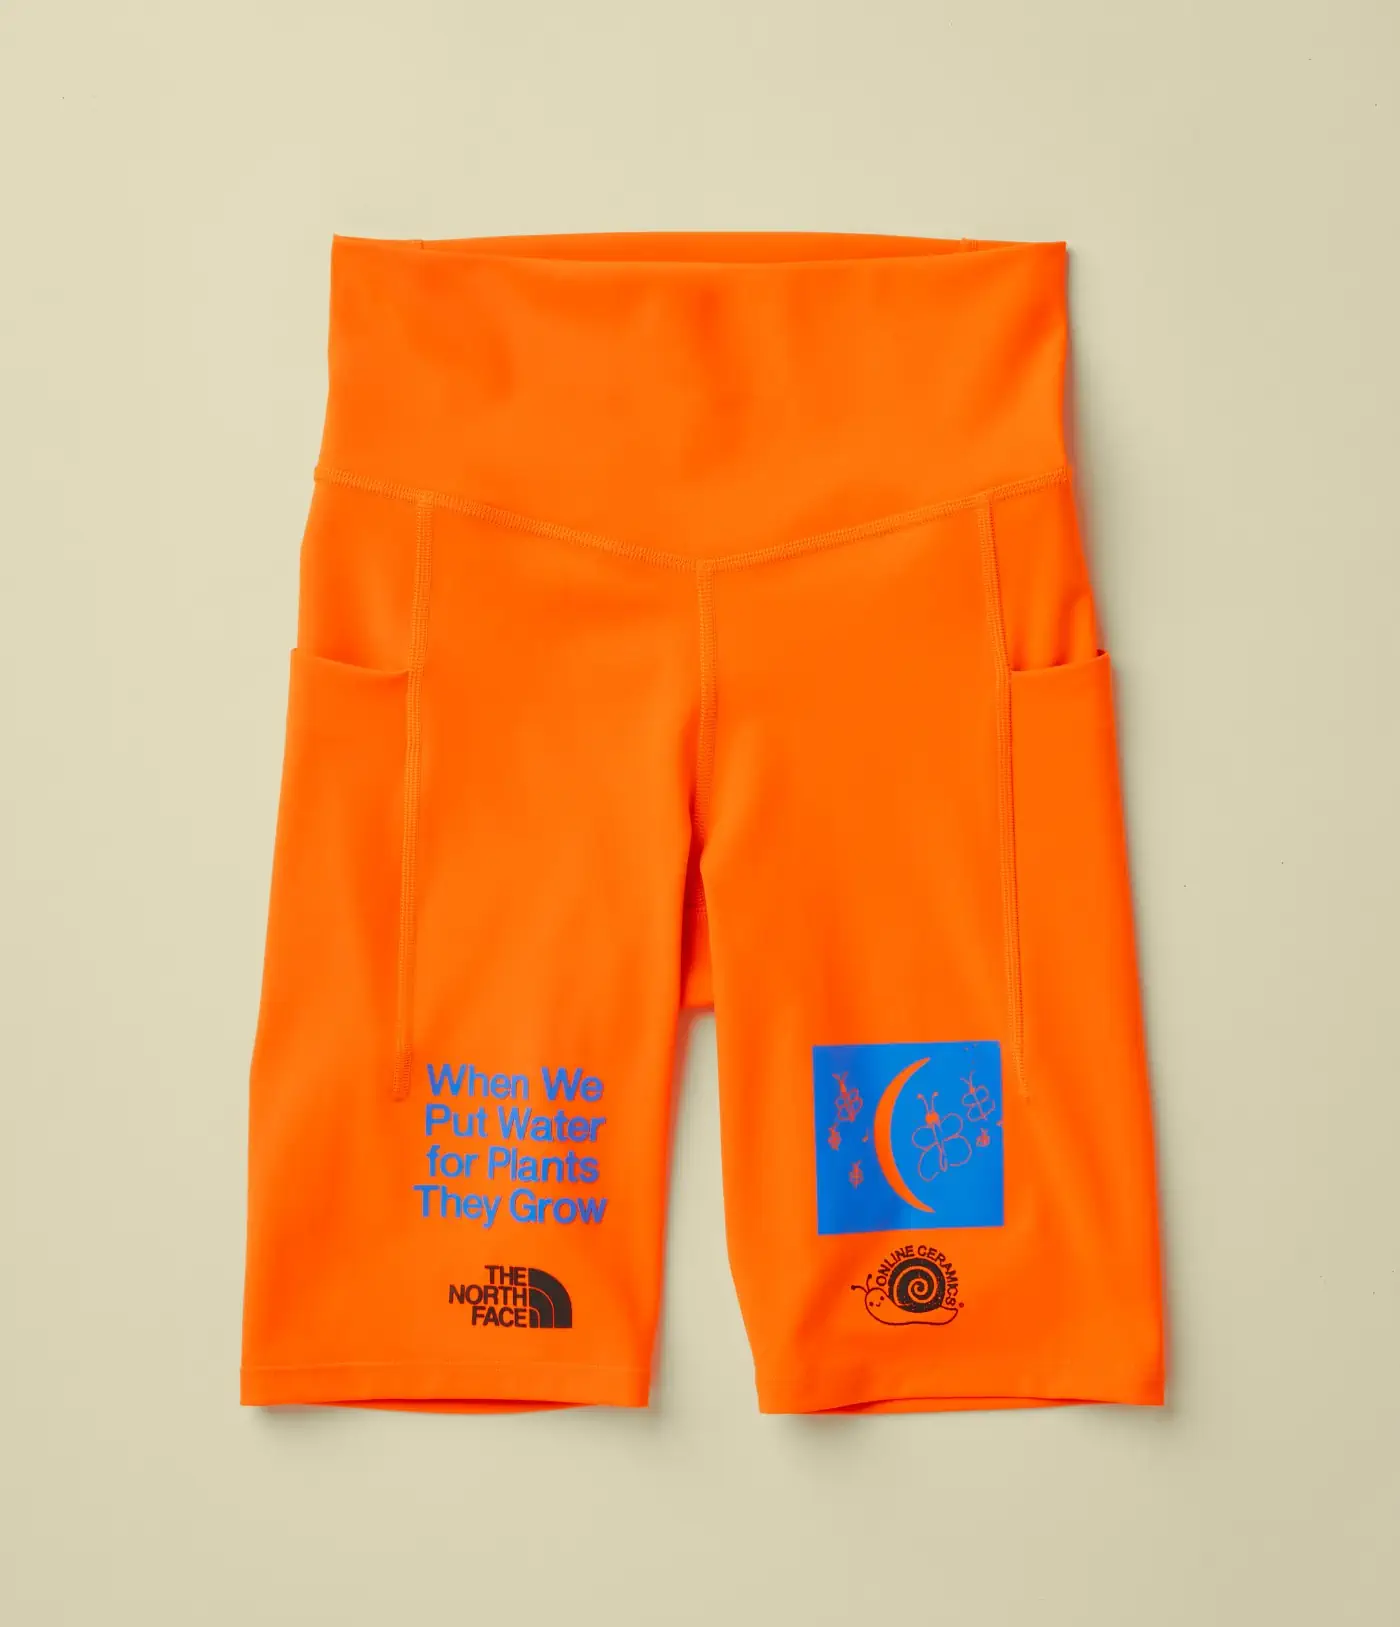 The North Face x Online Ceramics 2nd Collaboration